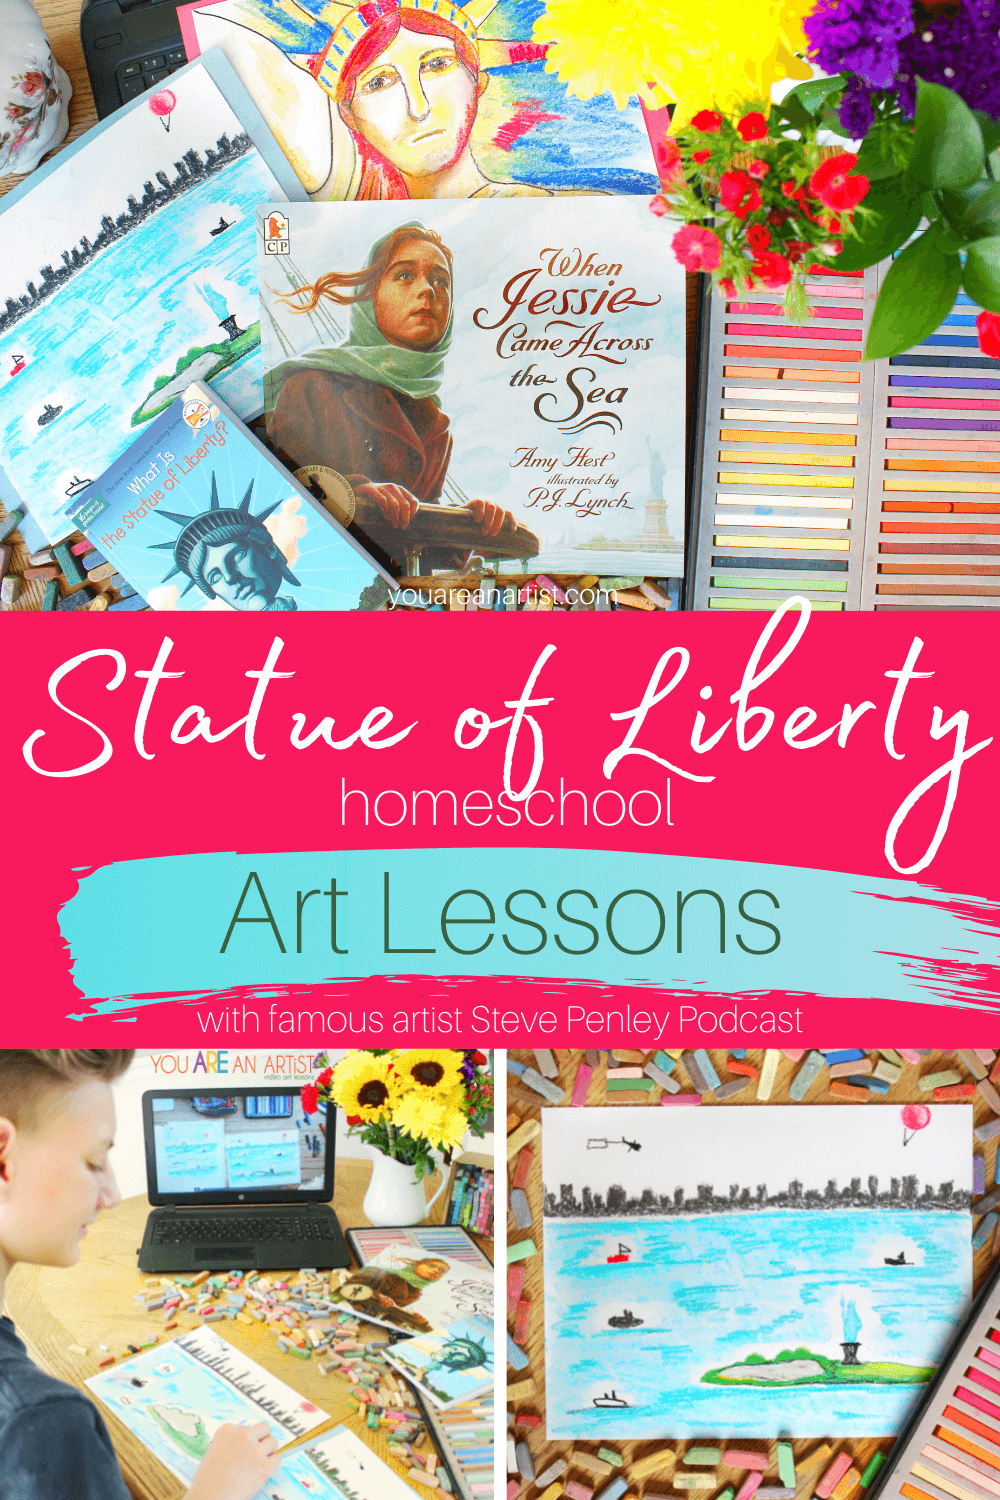 A Homeschool Lesson on Artist Steve Penley's Statue of Liberty : This homeschool lesson has everything you need to learn more about artist Steve Penley and the Statue of Liberty he painted, including a chance to create your own work of art! #chalkpastels #youareanartist #famousartists #statueofliberty #homeschoolart #artlessons #stevepenley #onlineartlessons